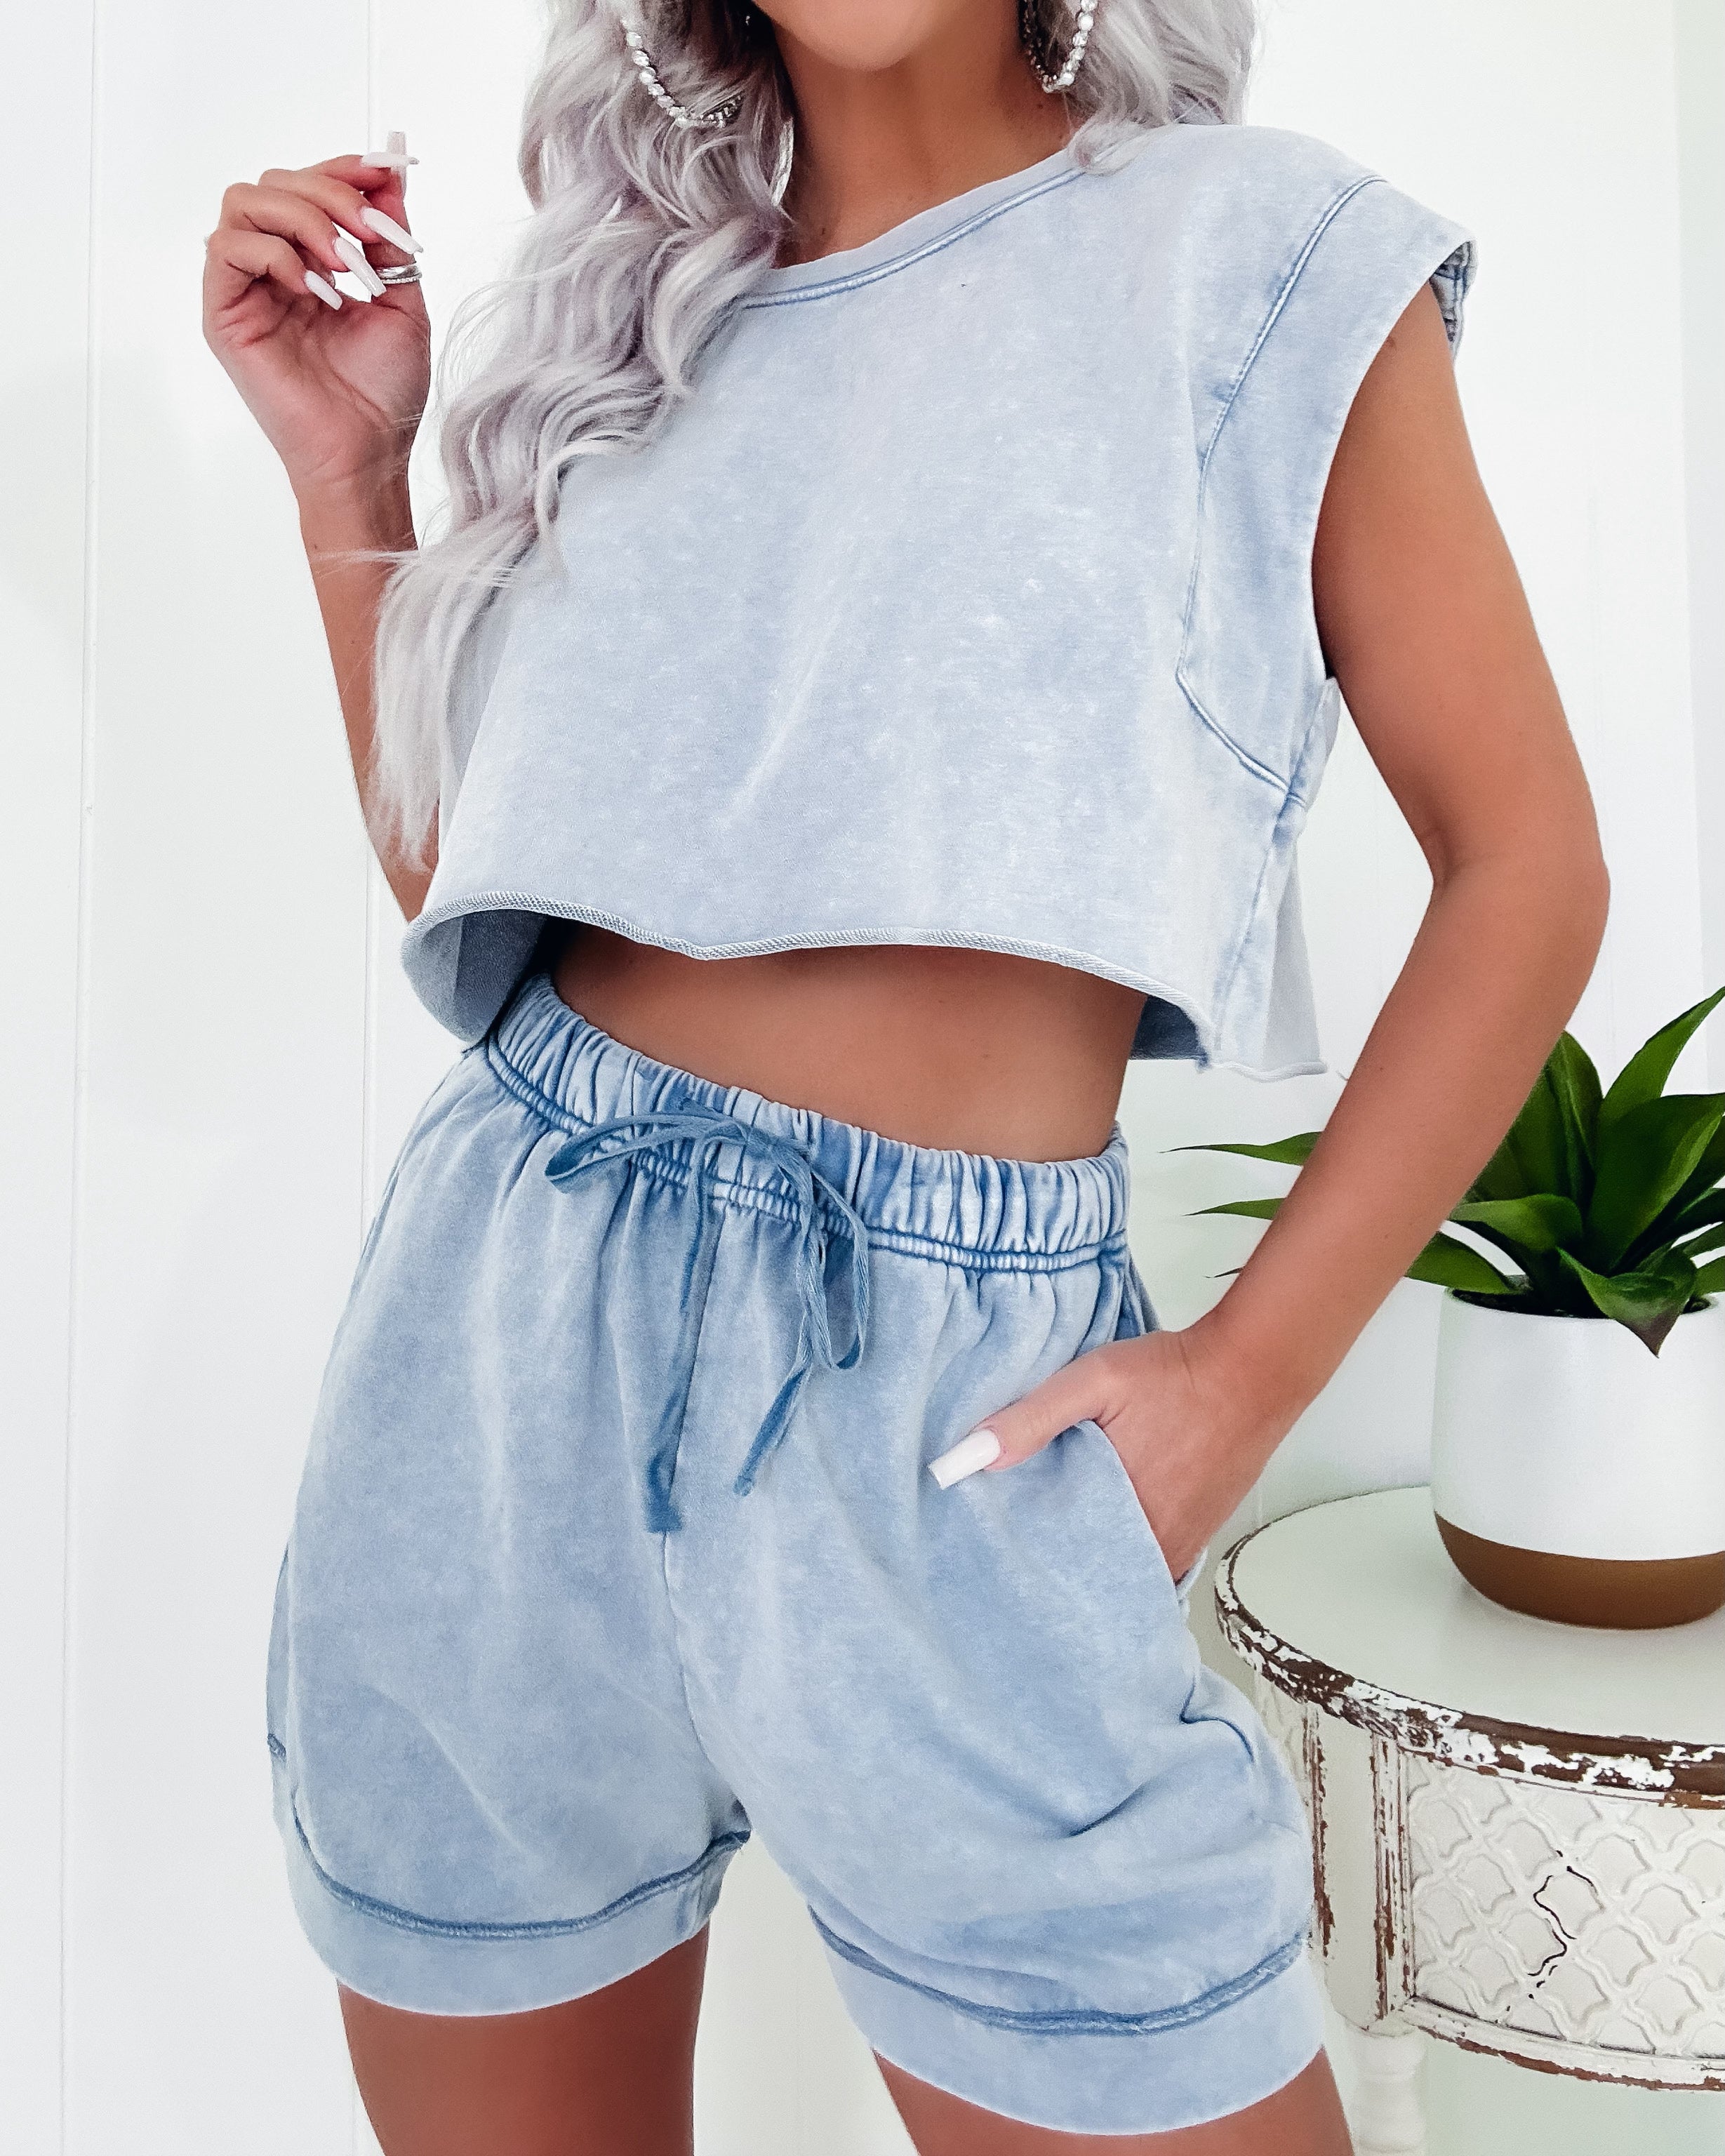 Warm Up Mineral Wash Muscle Crop Top - Blue